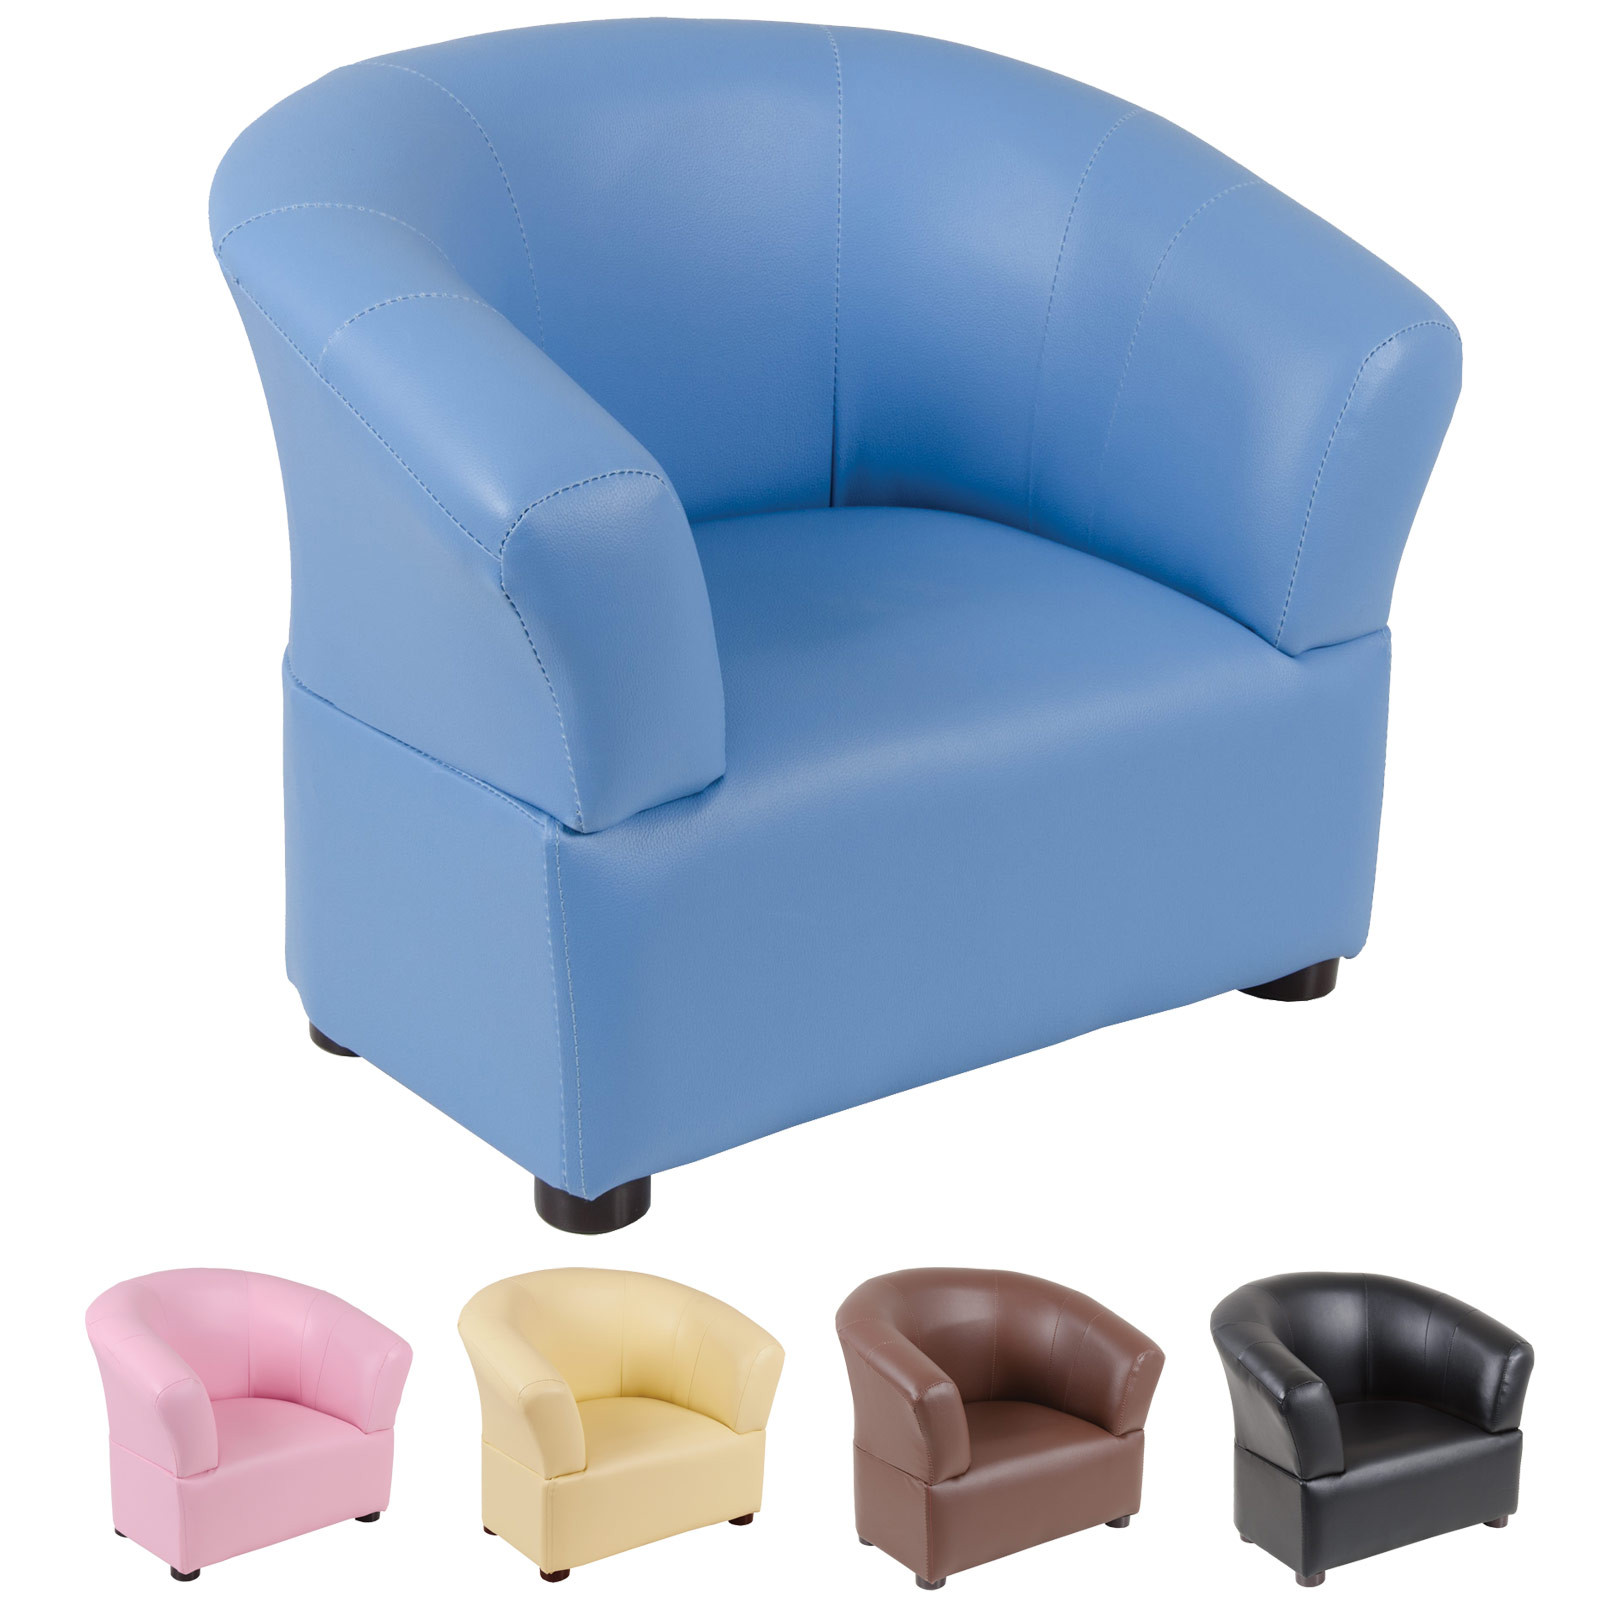 Kids Comfy Chair
 Kids fy PVC Leather Look Tub Chair Armchair Seat